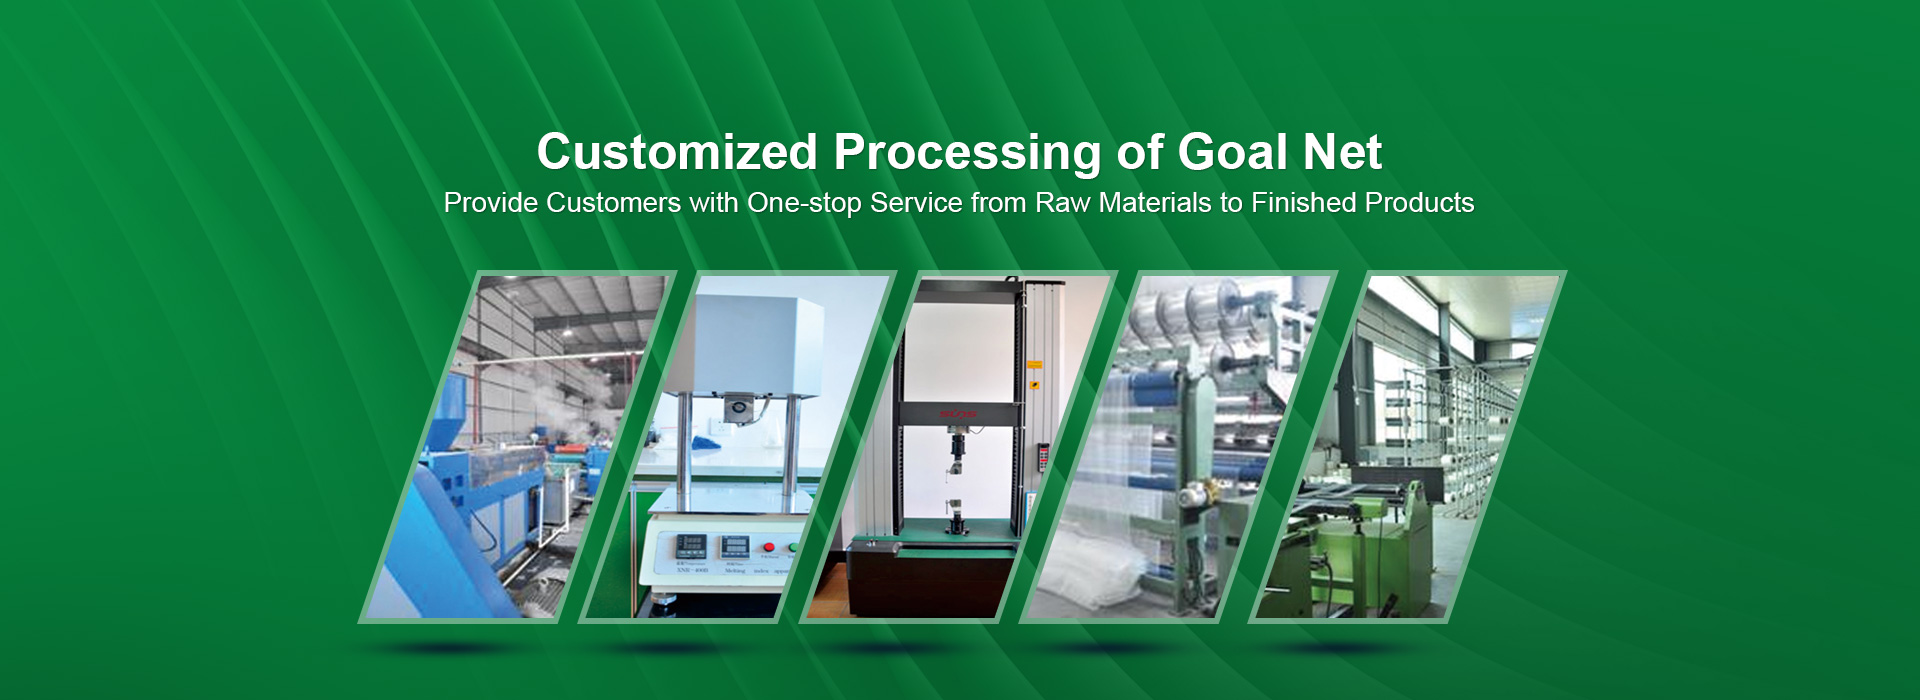 Customized processing of products